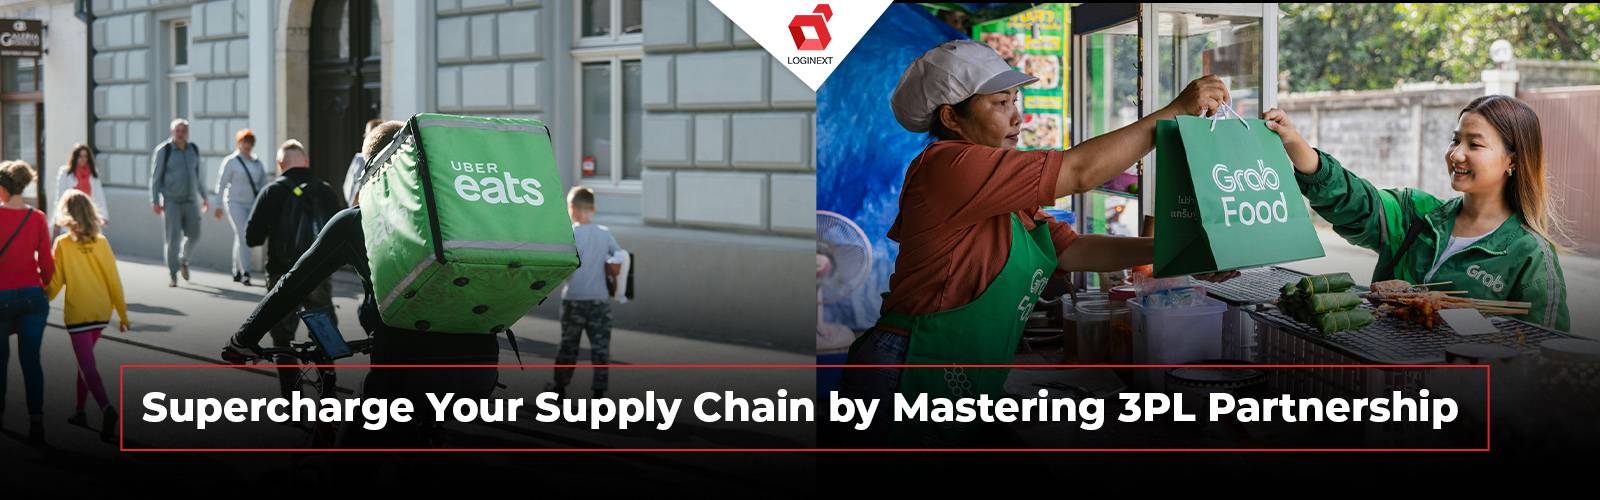 Master 3PL logistics to streamline supply chain operations